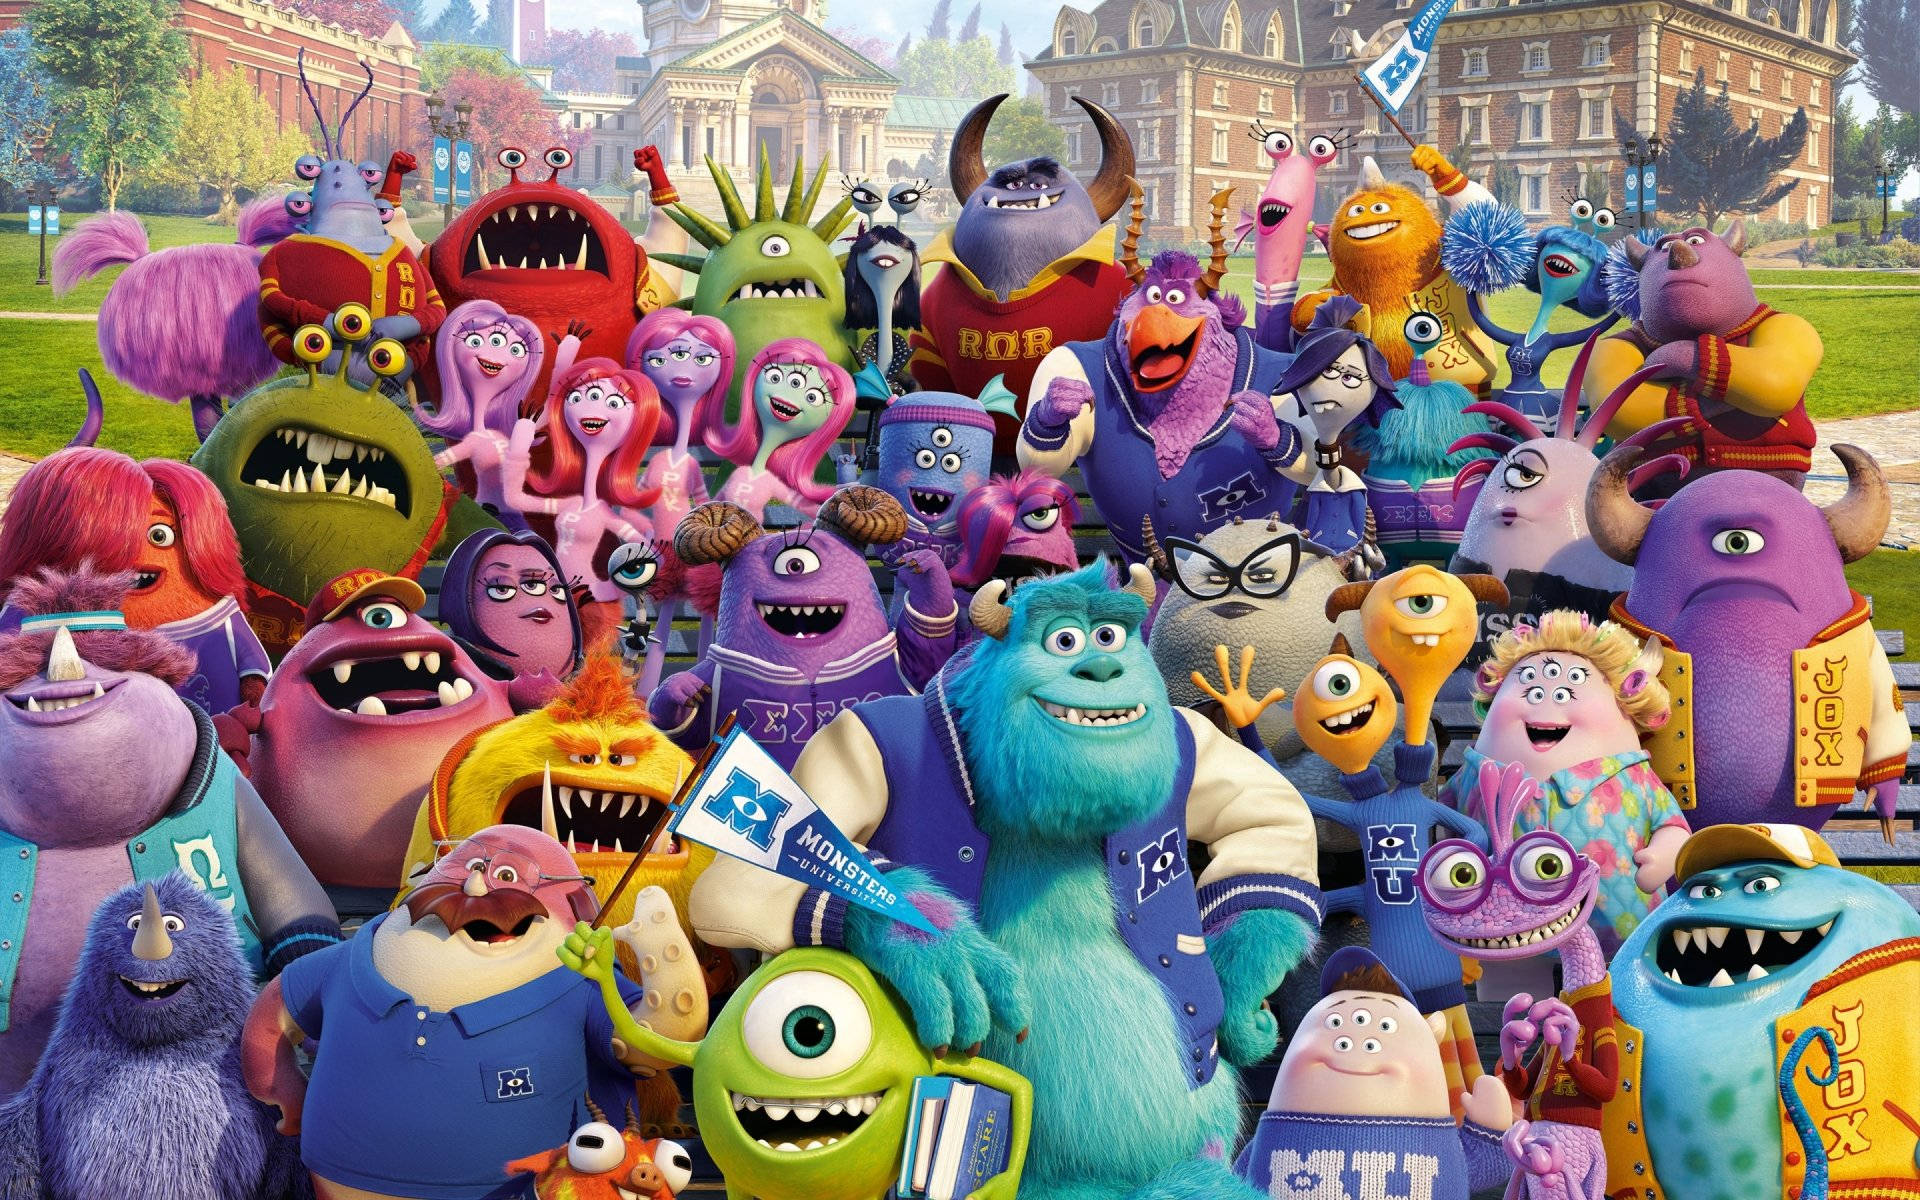 Top 999+ Monsters University Wallpapers Full HD, 4K✅Free to Use